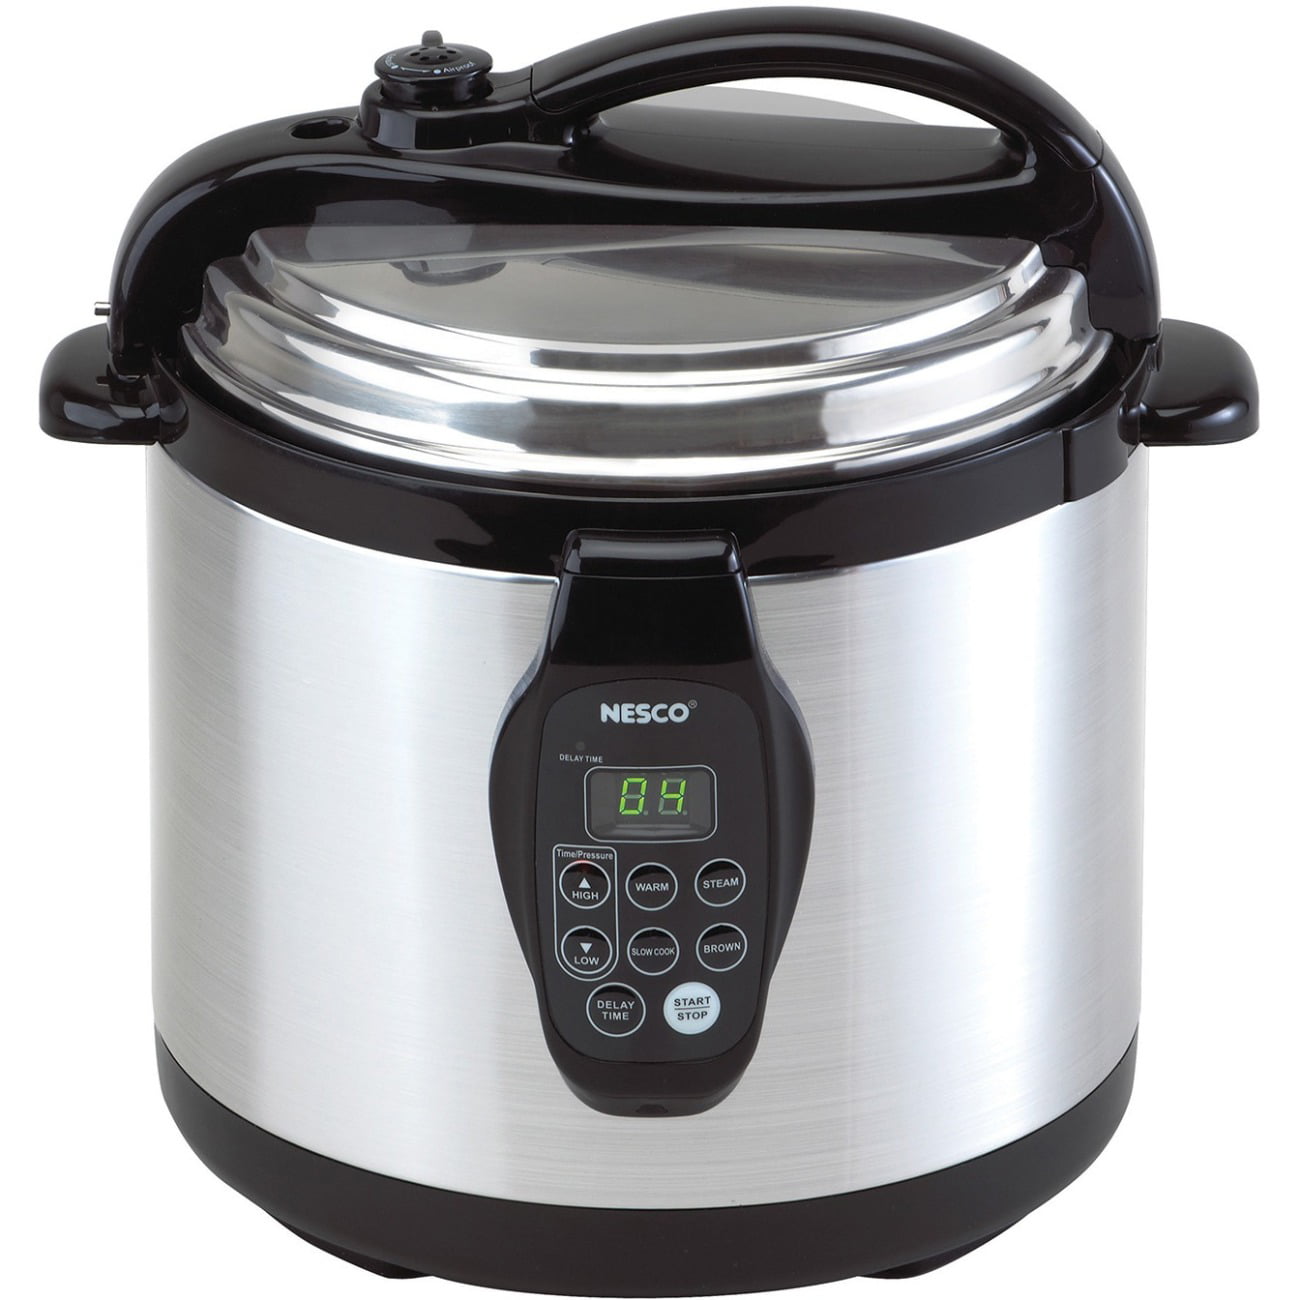 Nesco Canner/ Learning How To Use My New Nesco Digital Pressure